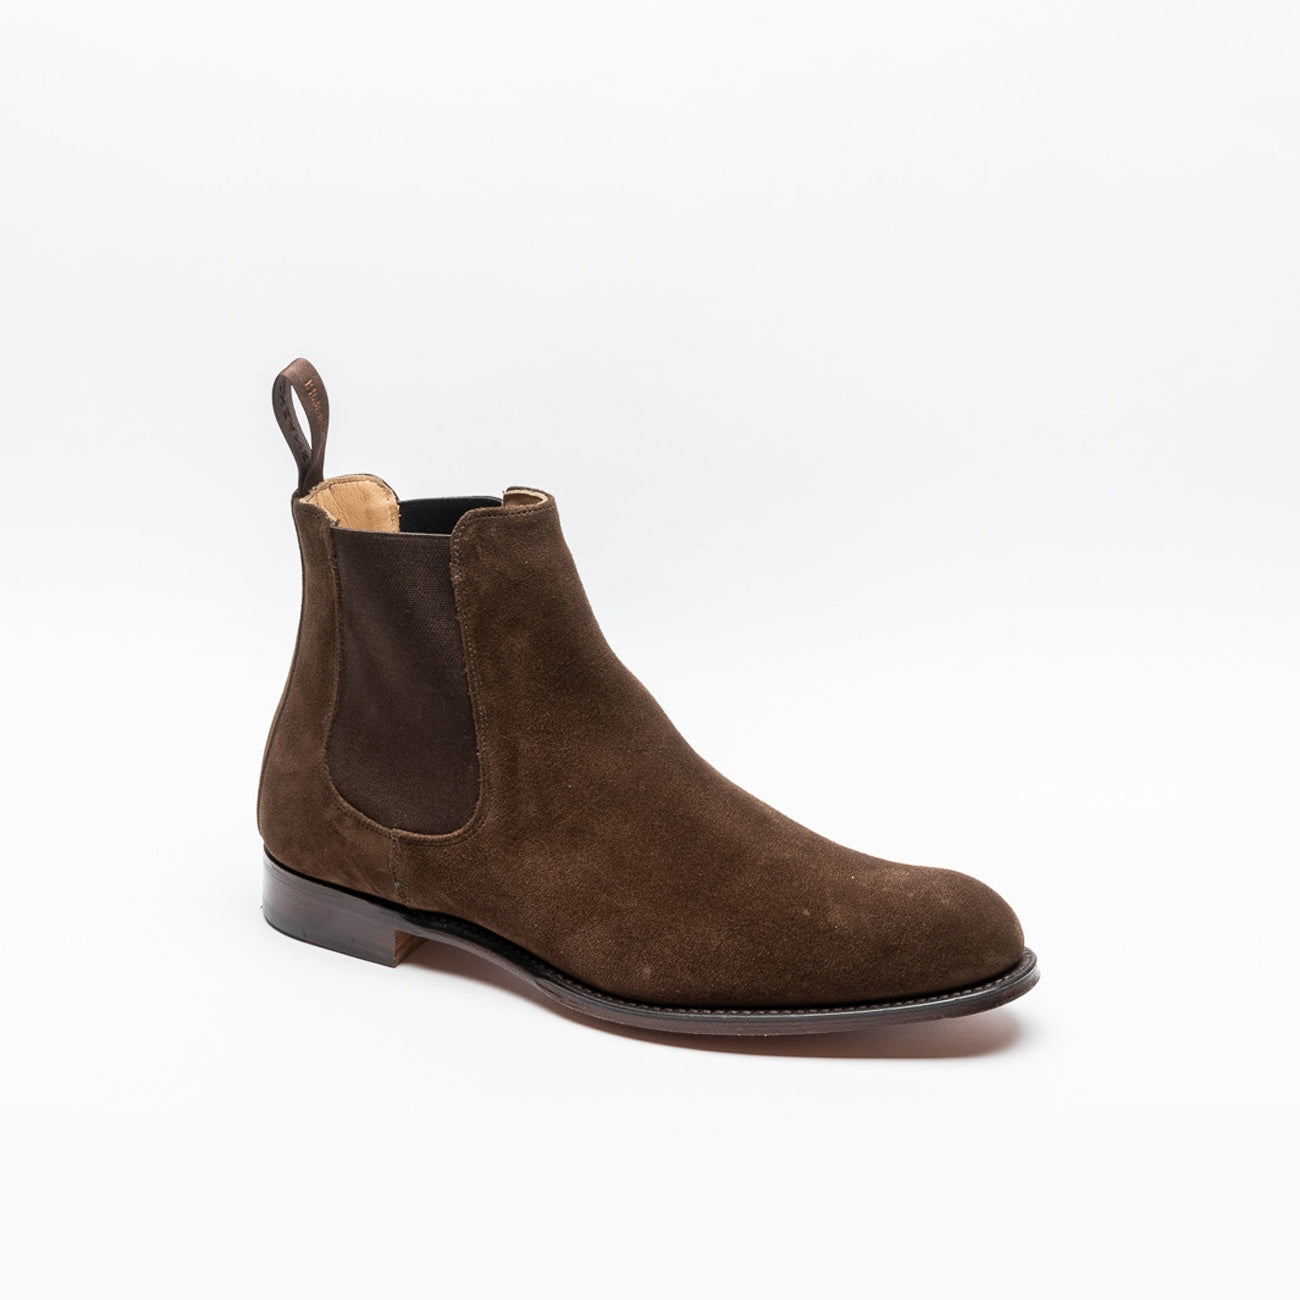 Cheaney Joseph & Sons plough suede chelsea boot